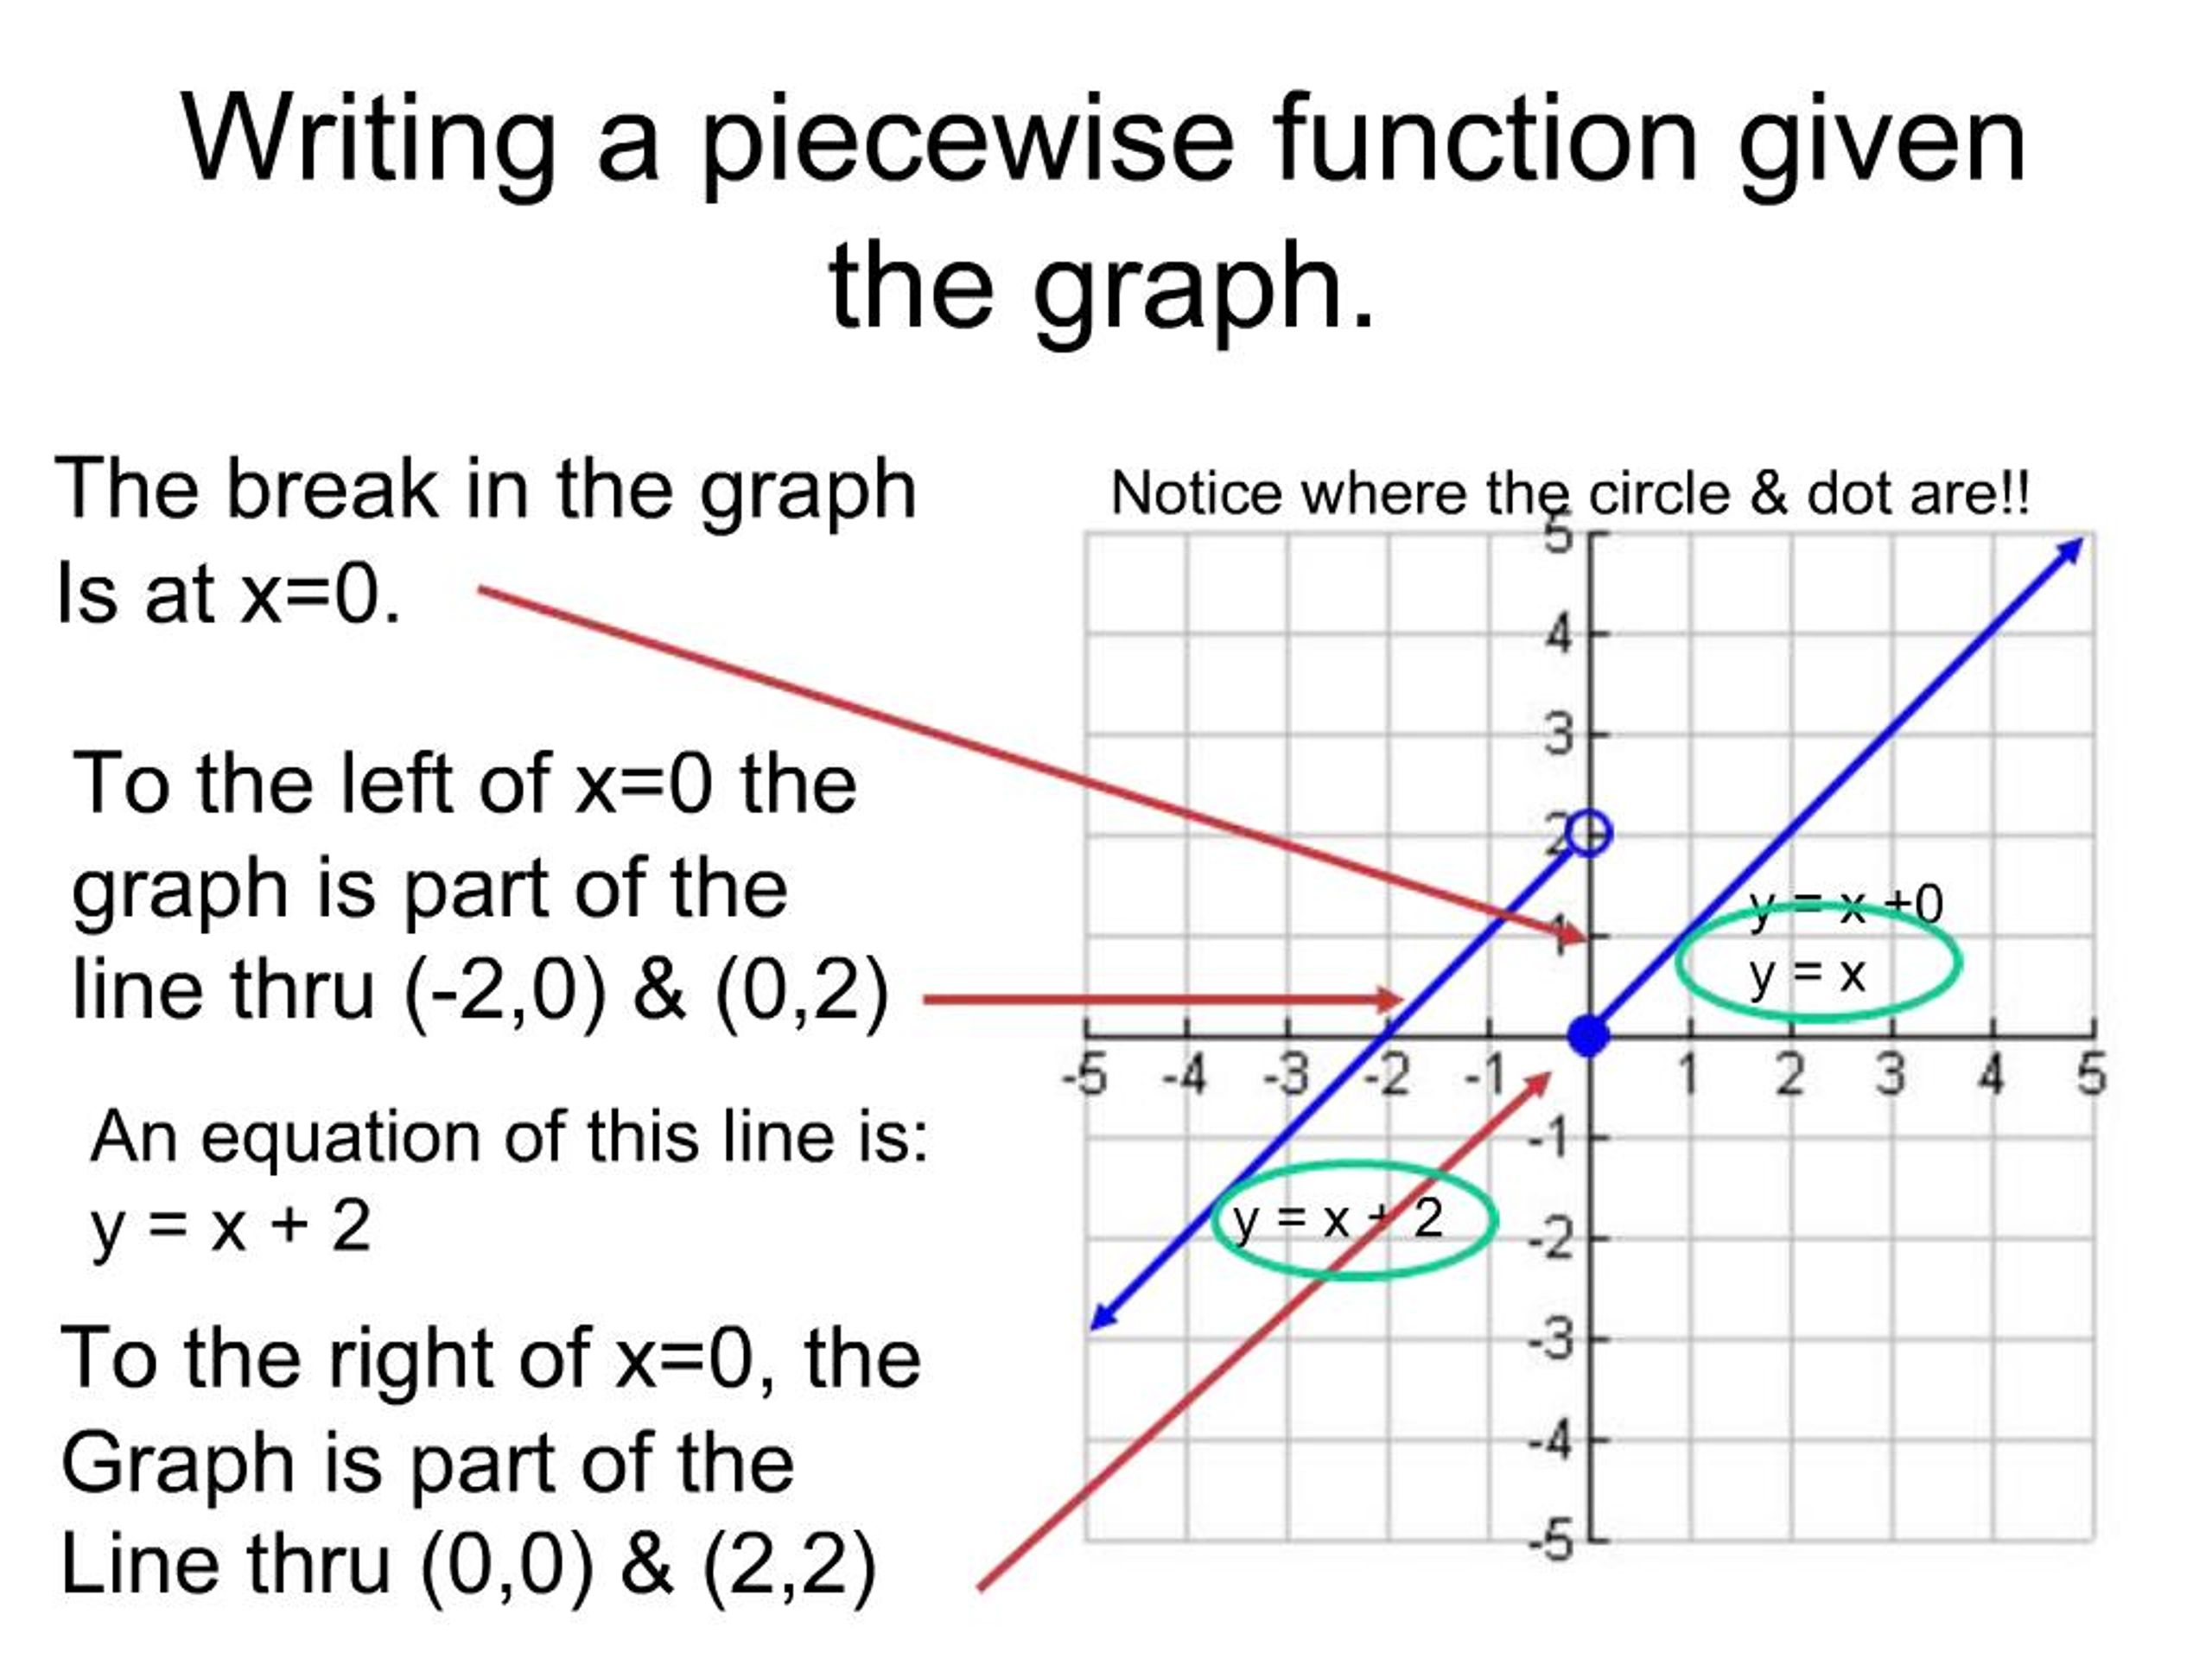 PPT - 14.14 continued Writing Equations for Piecewise Functions and